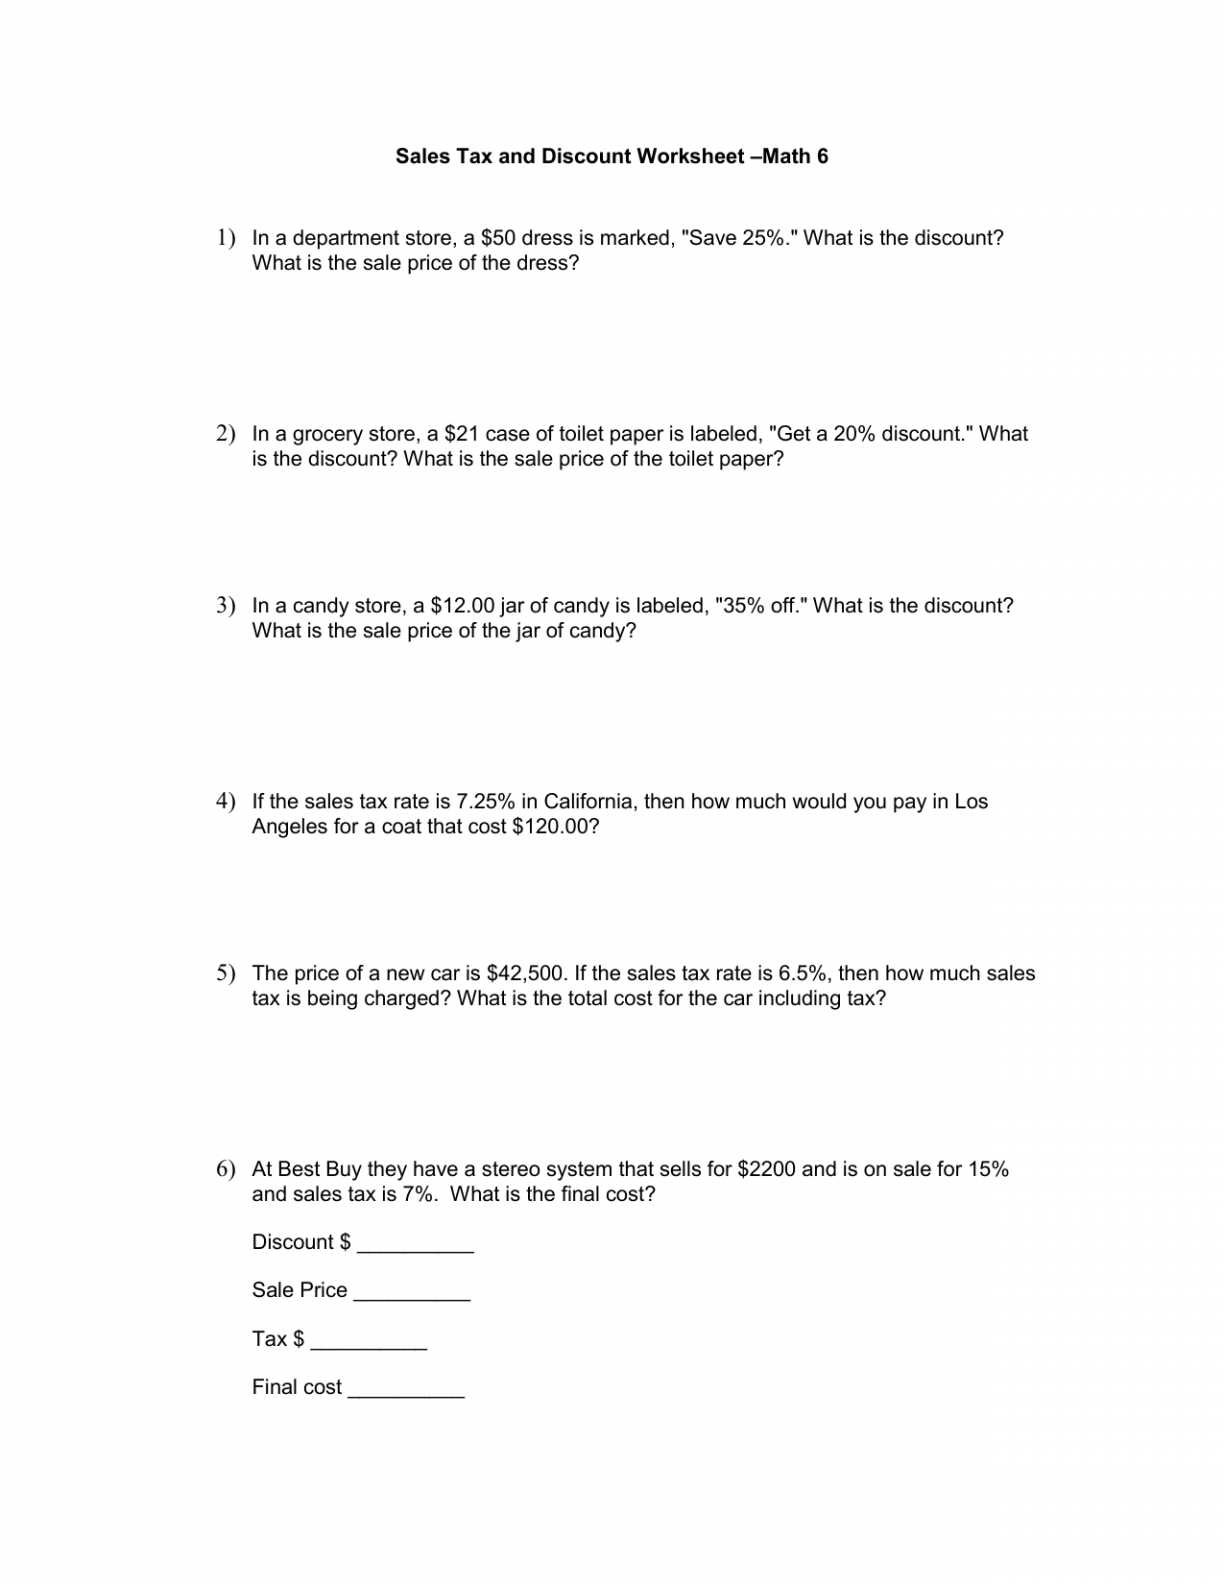 Calculating Sales Tax Worksheet together with Sales Tax Worksheets 7th Grade the Best Worksheets Image Collection